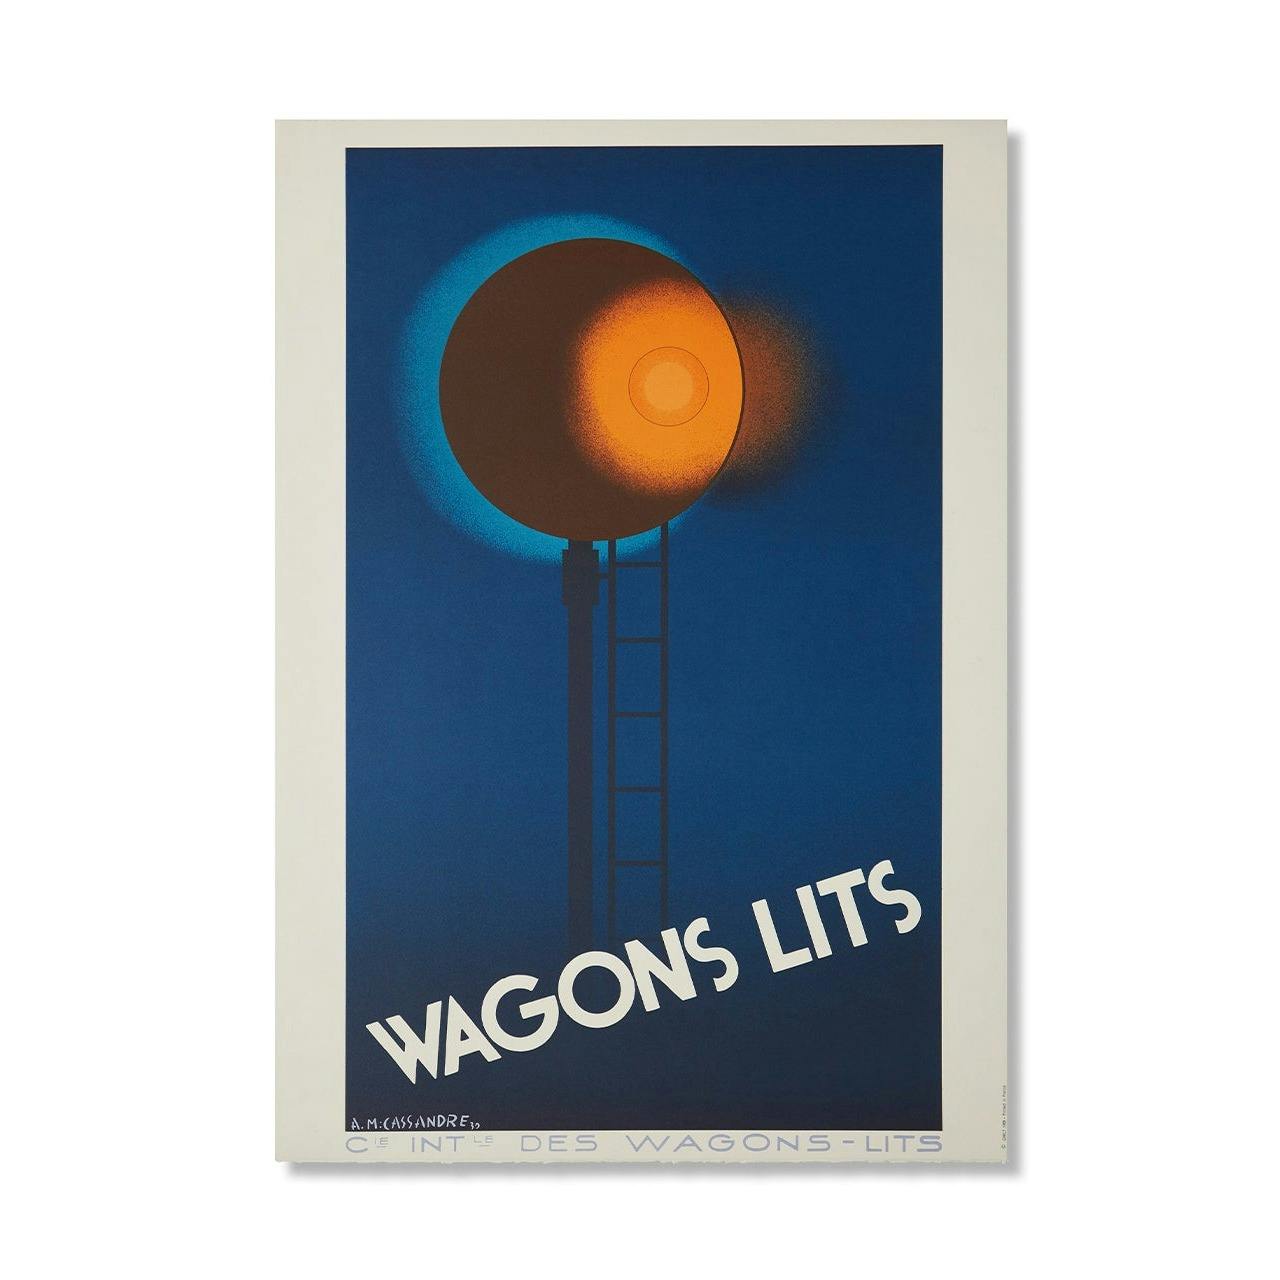 WAGONS-LITZ 'ROUTE BLEUE' POSTER [REPRODUCED EDITION